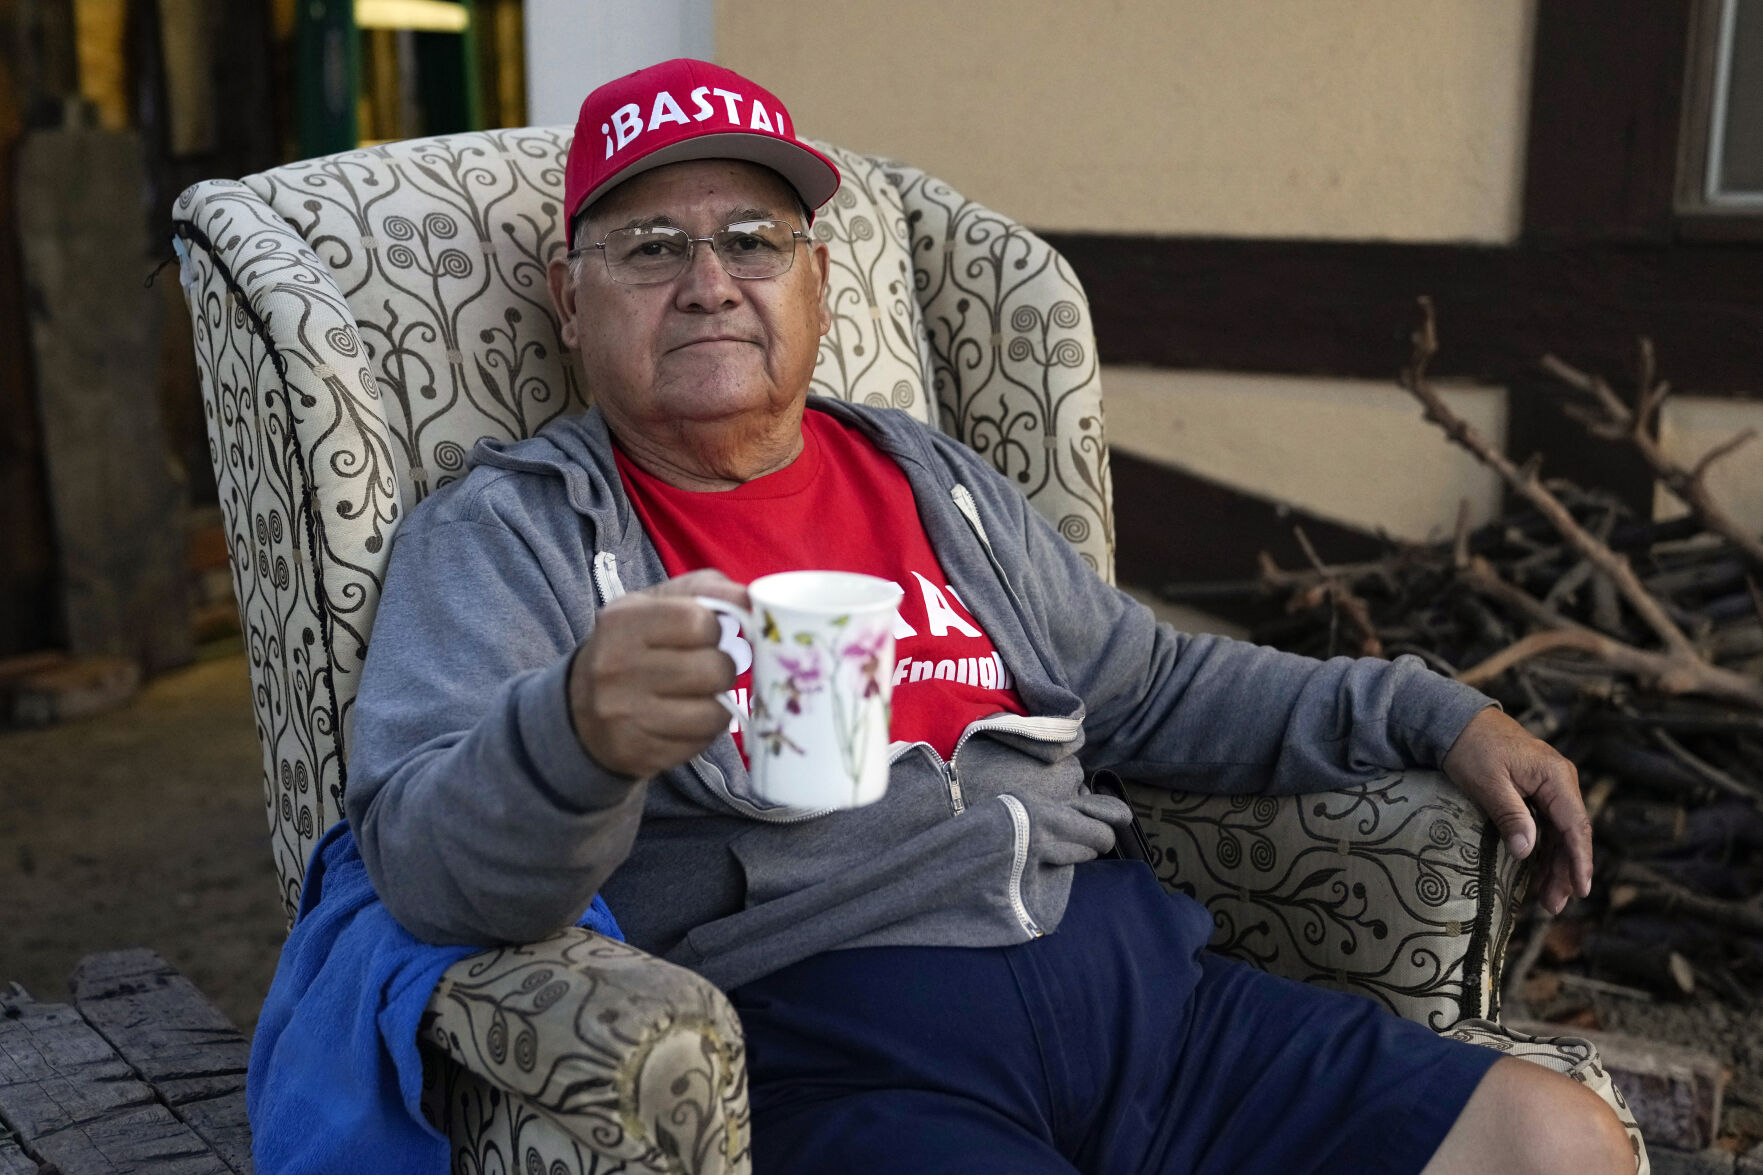 <p>Ron Flores, a Republican, sits on his porch, Thursday, Nov. 3, 2022, in Huntington Beach, Calif. Flores is retired and helps campaign for conservative candidates. (AP Photo/Ashley Landis)</p>   PHOTO CREDIT: Ashley Landis - staff, AP